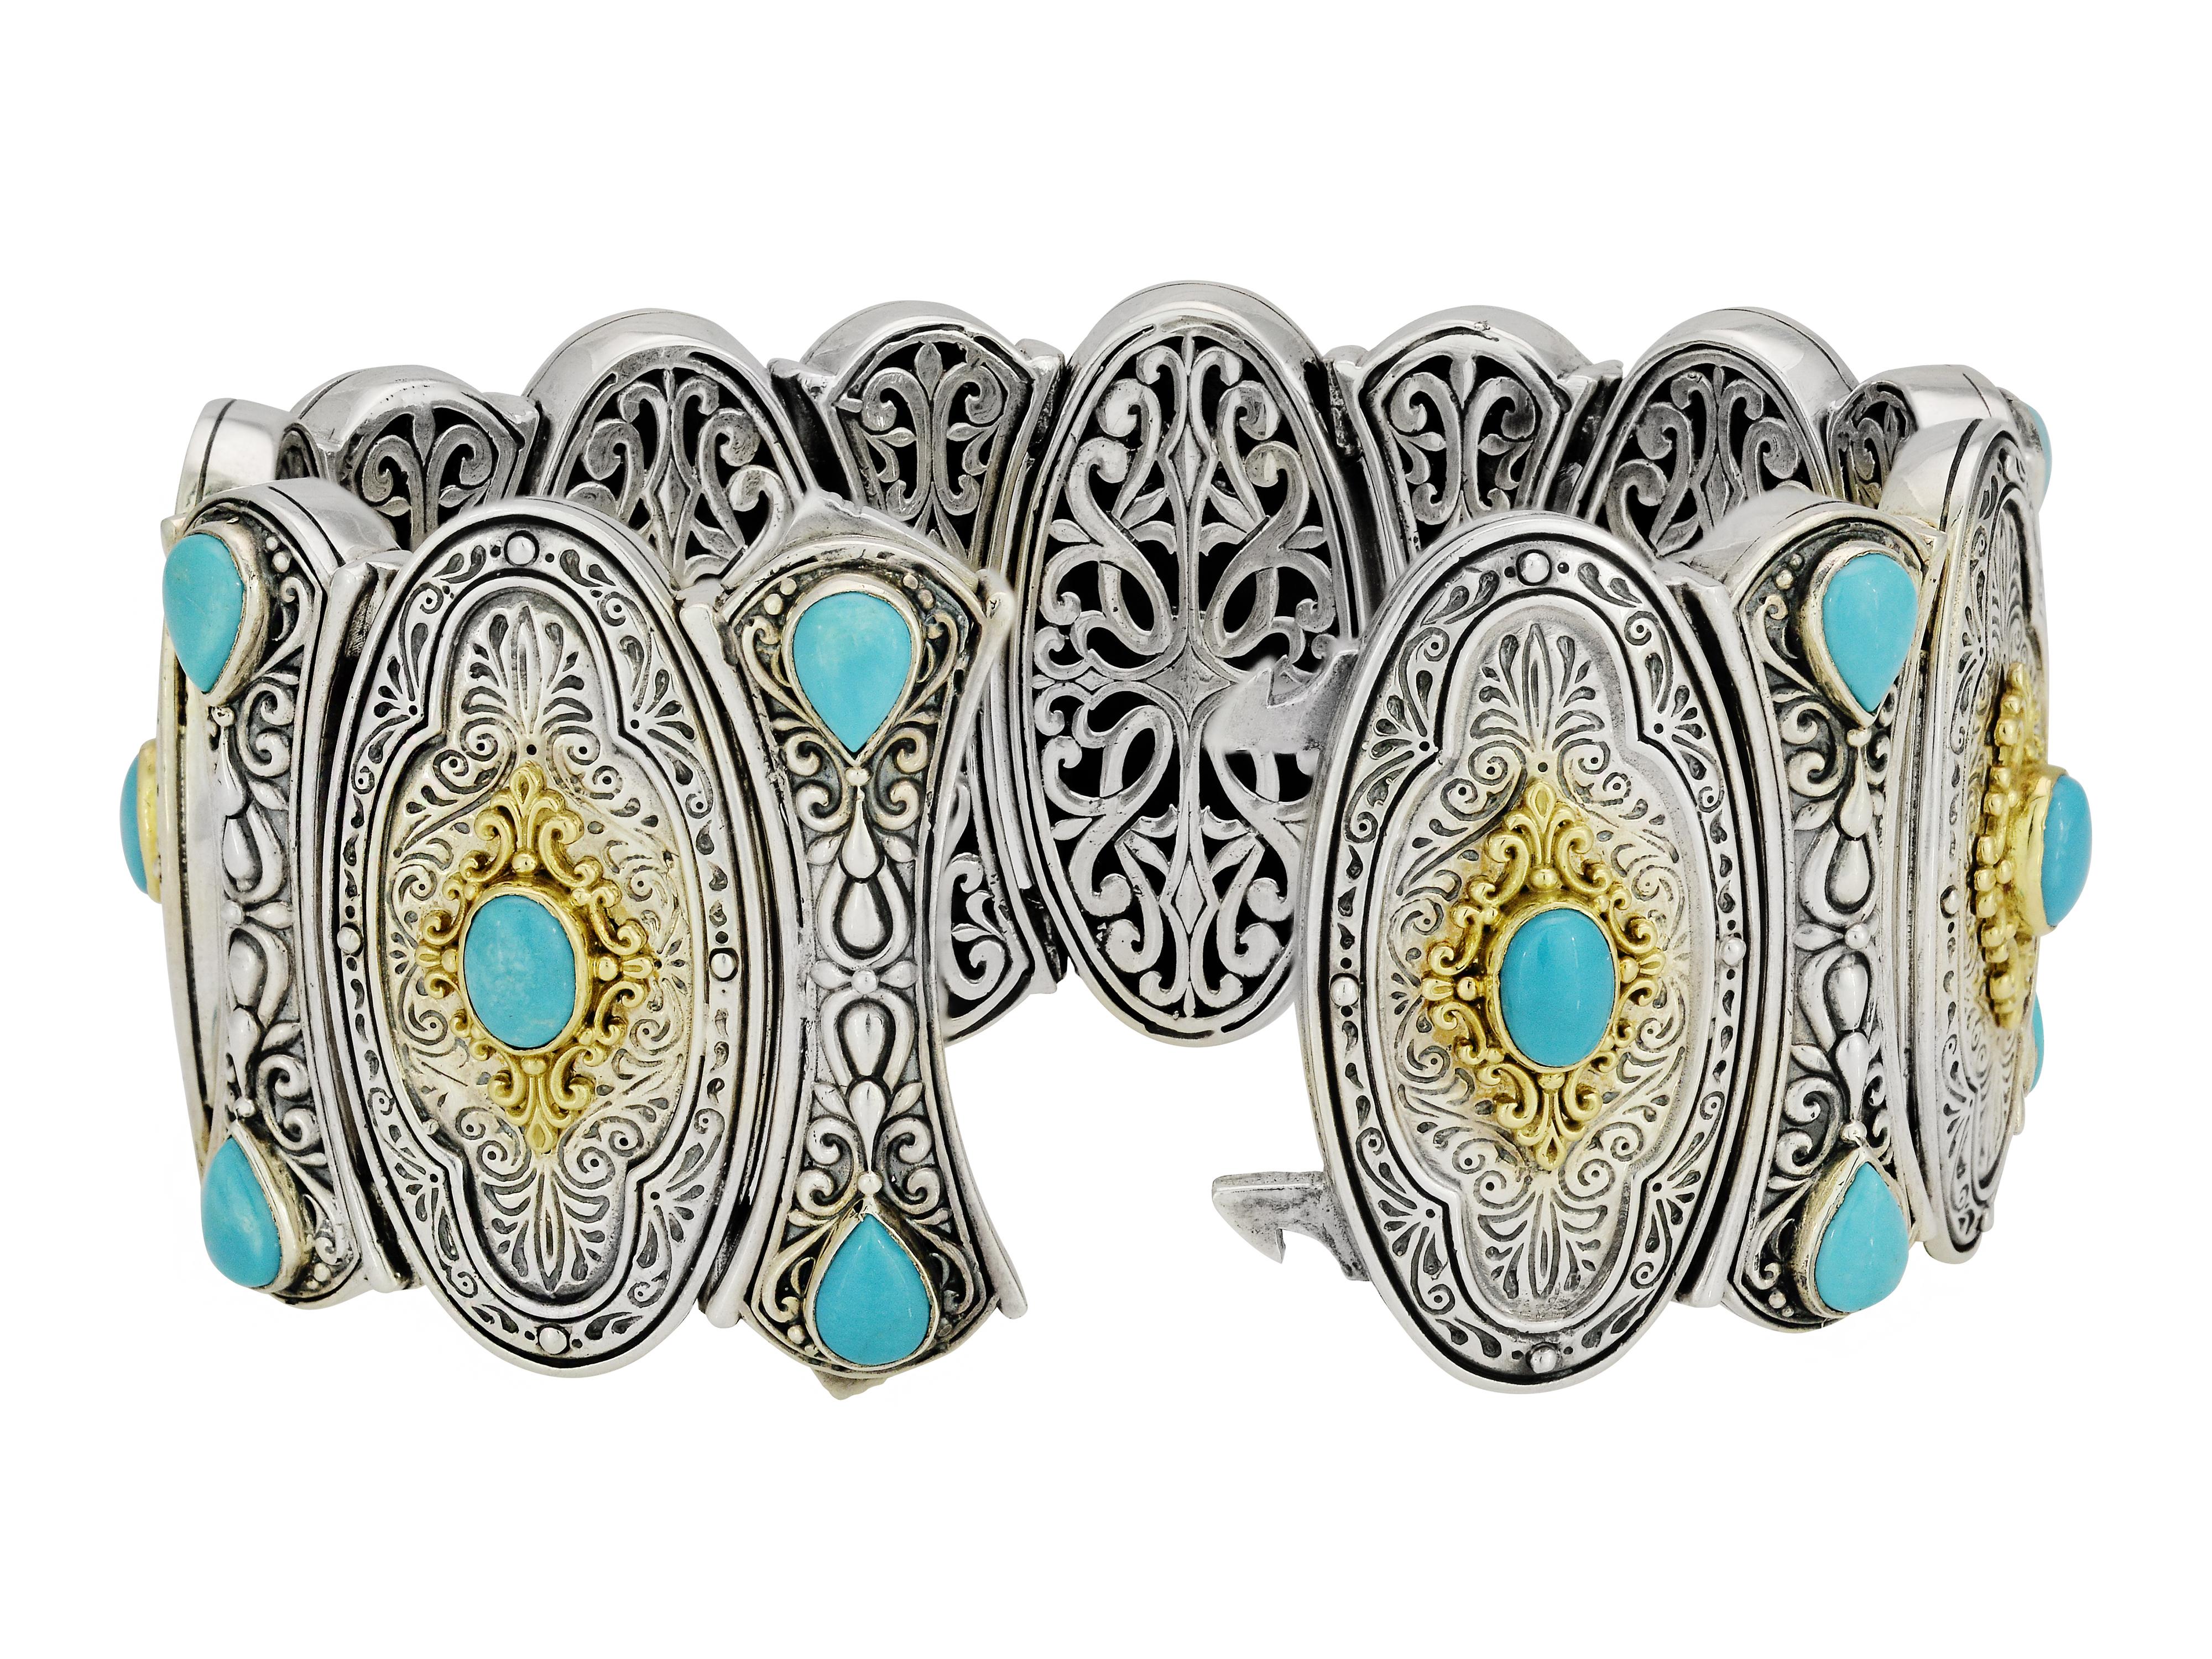 Wide Sterling Silver and 18 Karat Yellow Gold Bracelet From Designer Konstantino. The Bracelet Features 21 Bezel-set Oval and Pear Cut Cabochon Turquoise Stones. Original $3500 MSRP. Double Lock Squeeze Clasp. Decorated Grill Work on Back.
